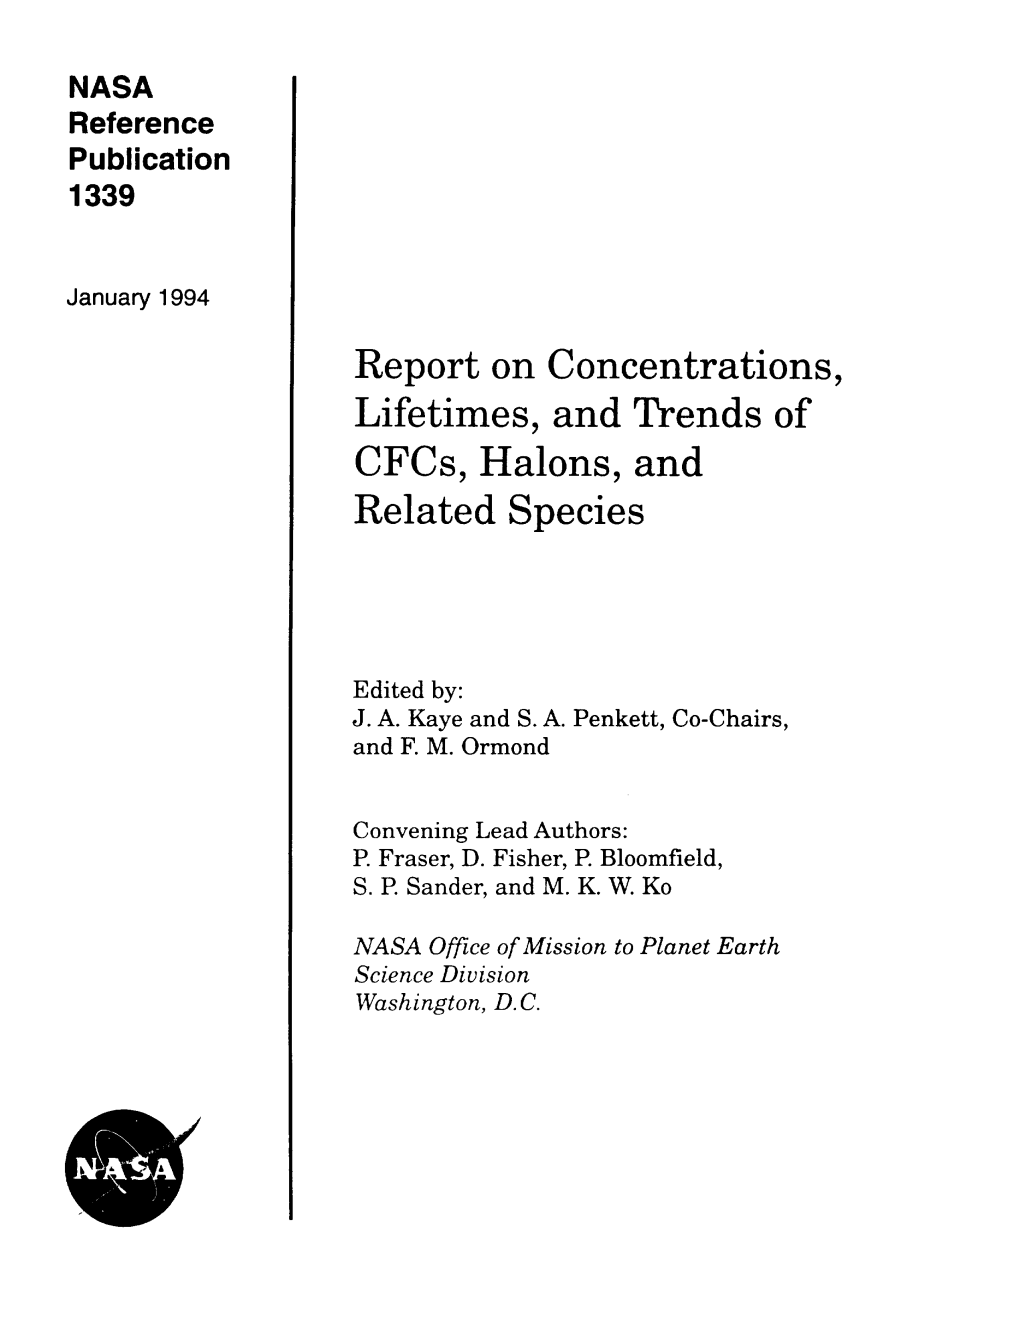 Report on Concentrations, Lifetimes, and Trends of Cfcs, Halons, and Related Species